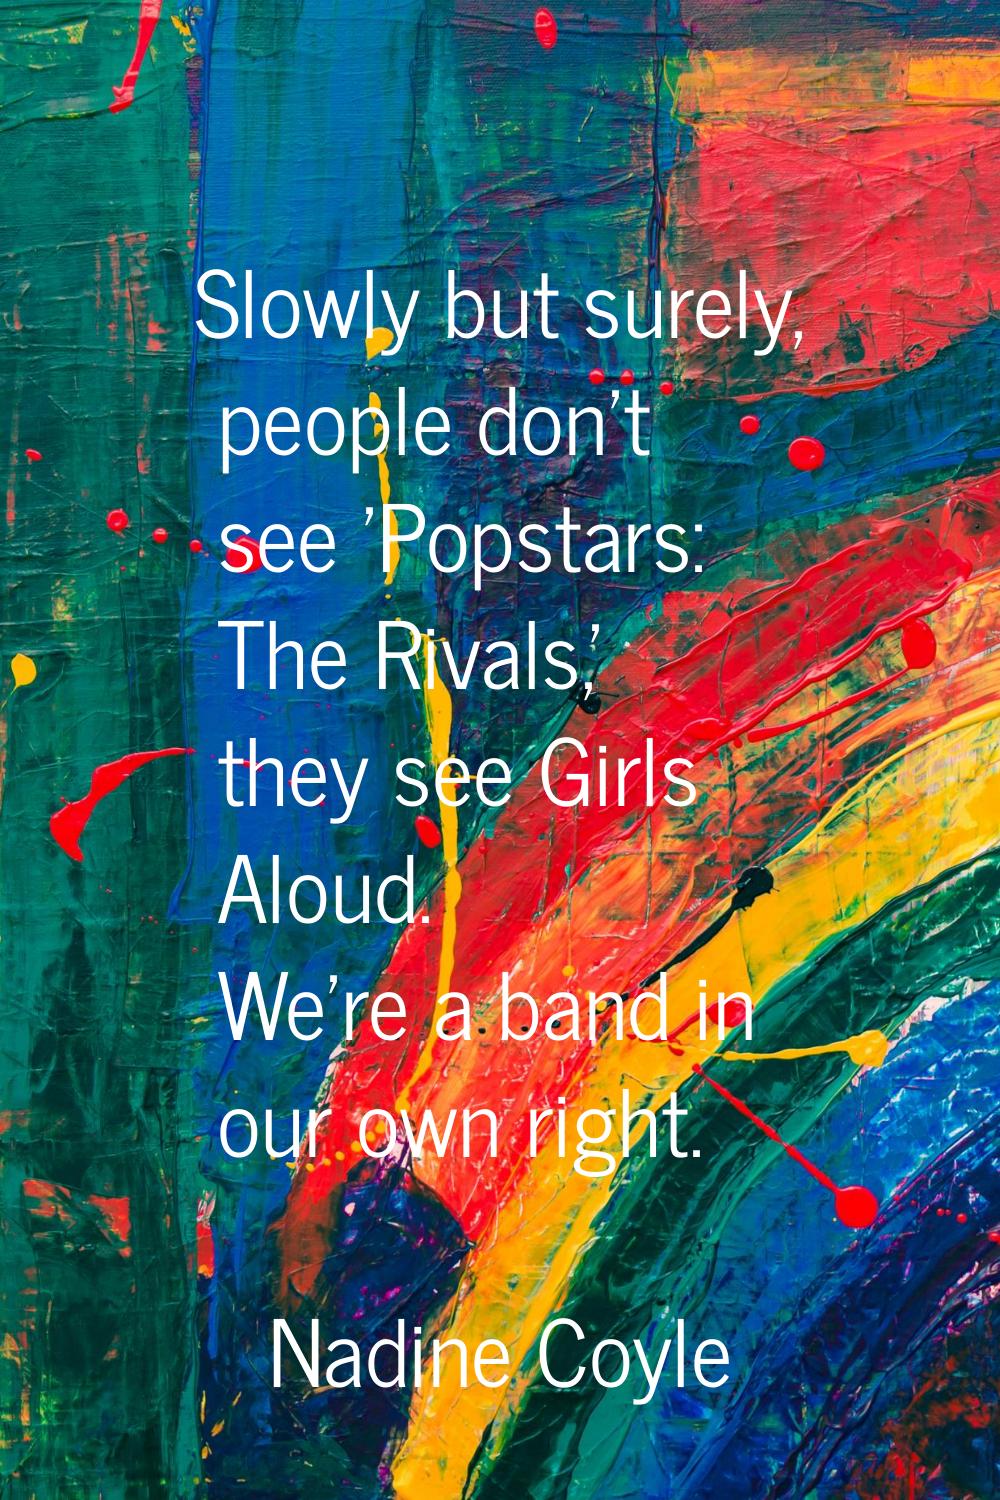 Slowly but surely, people don't see 'Popstars: The Rivals,' they see Girls Aloud. We're a band in o